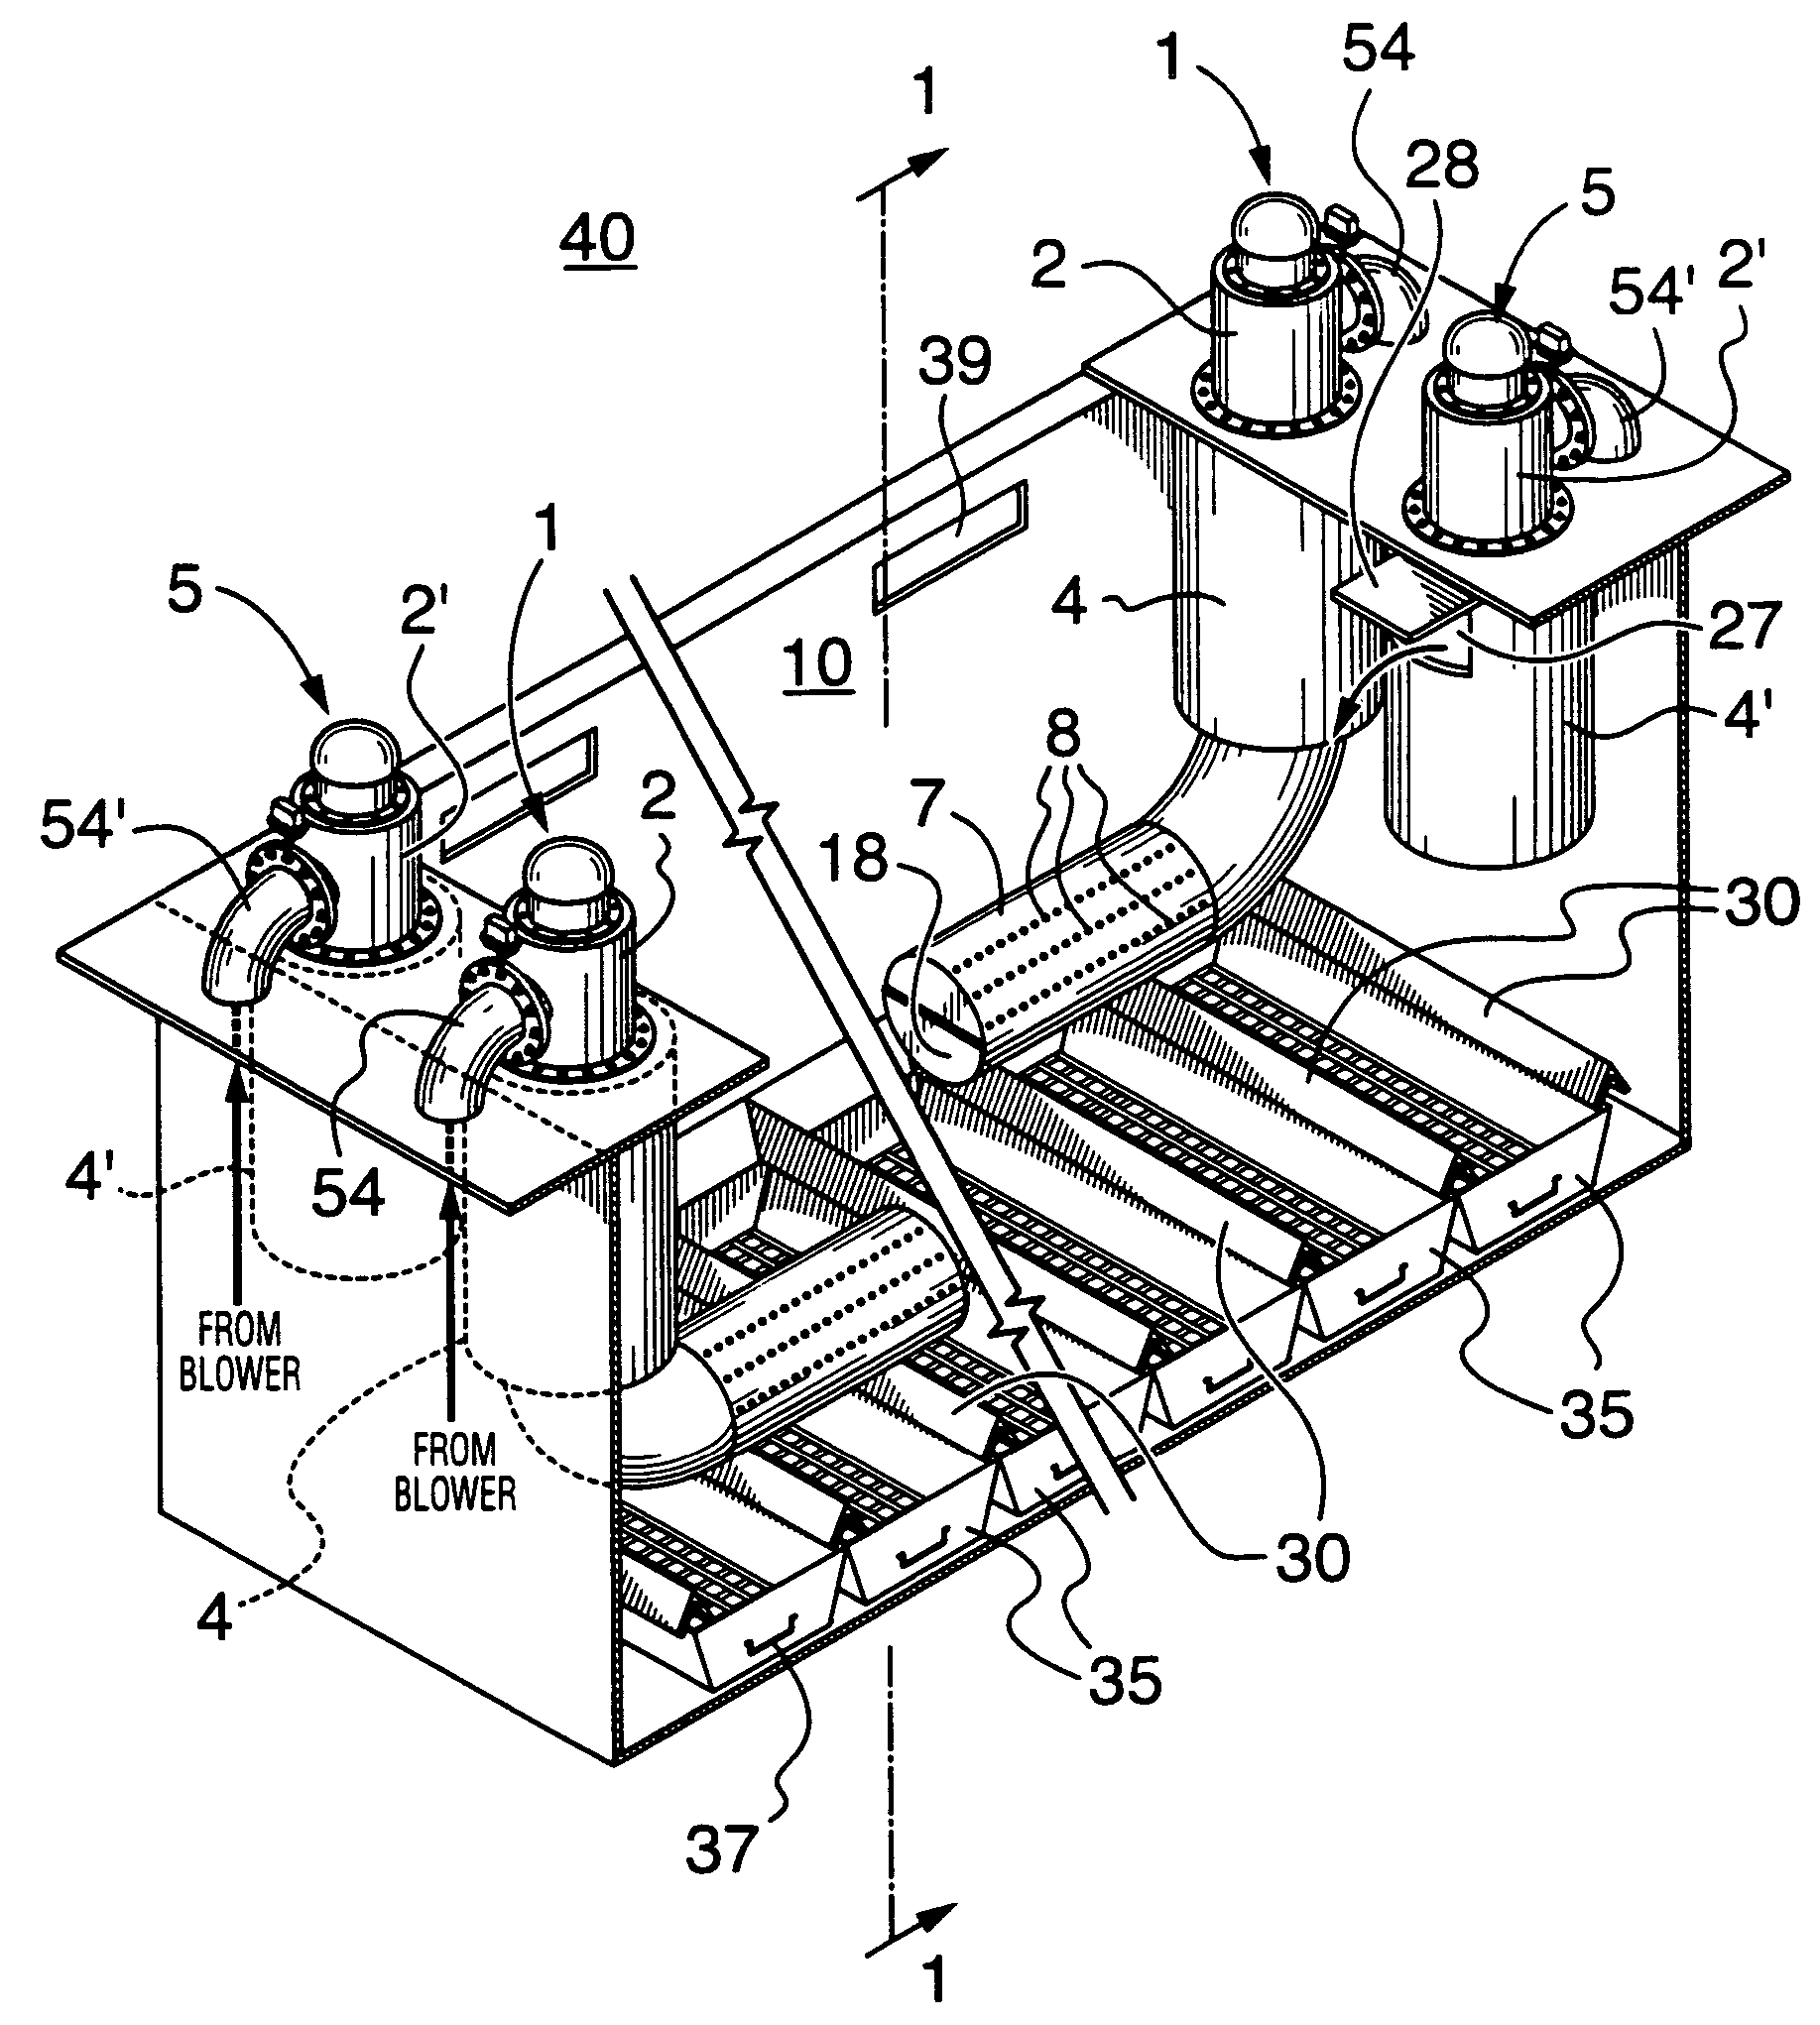 Startup burner assembly for snow melting apparatus and method of snow melting